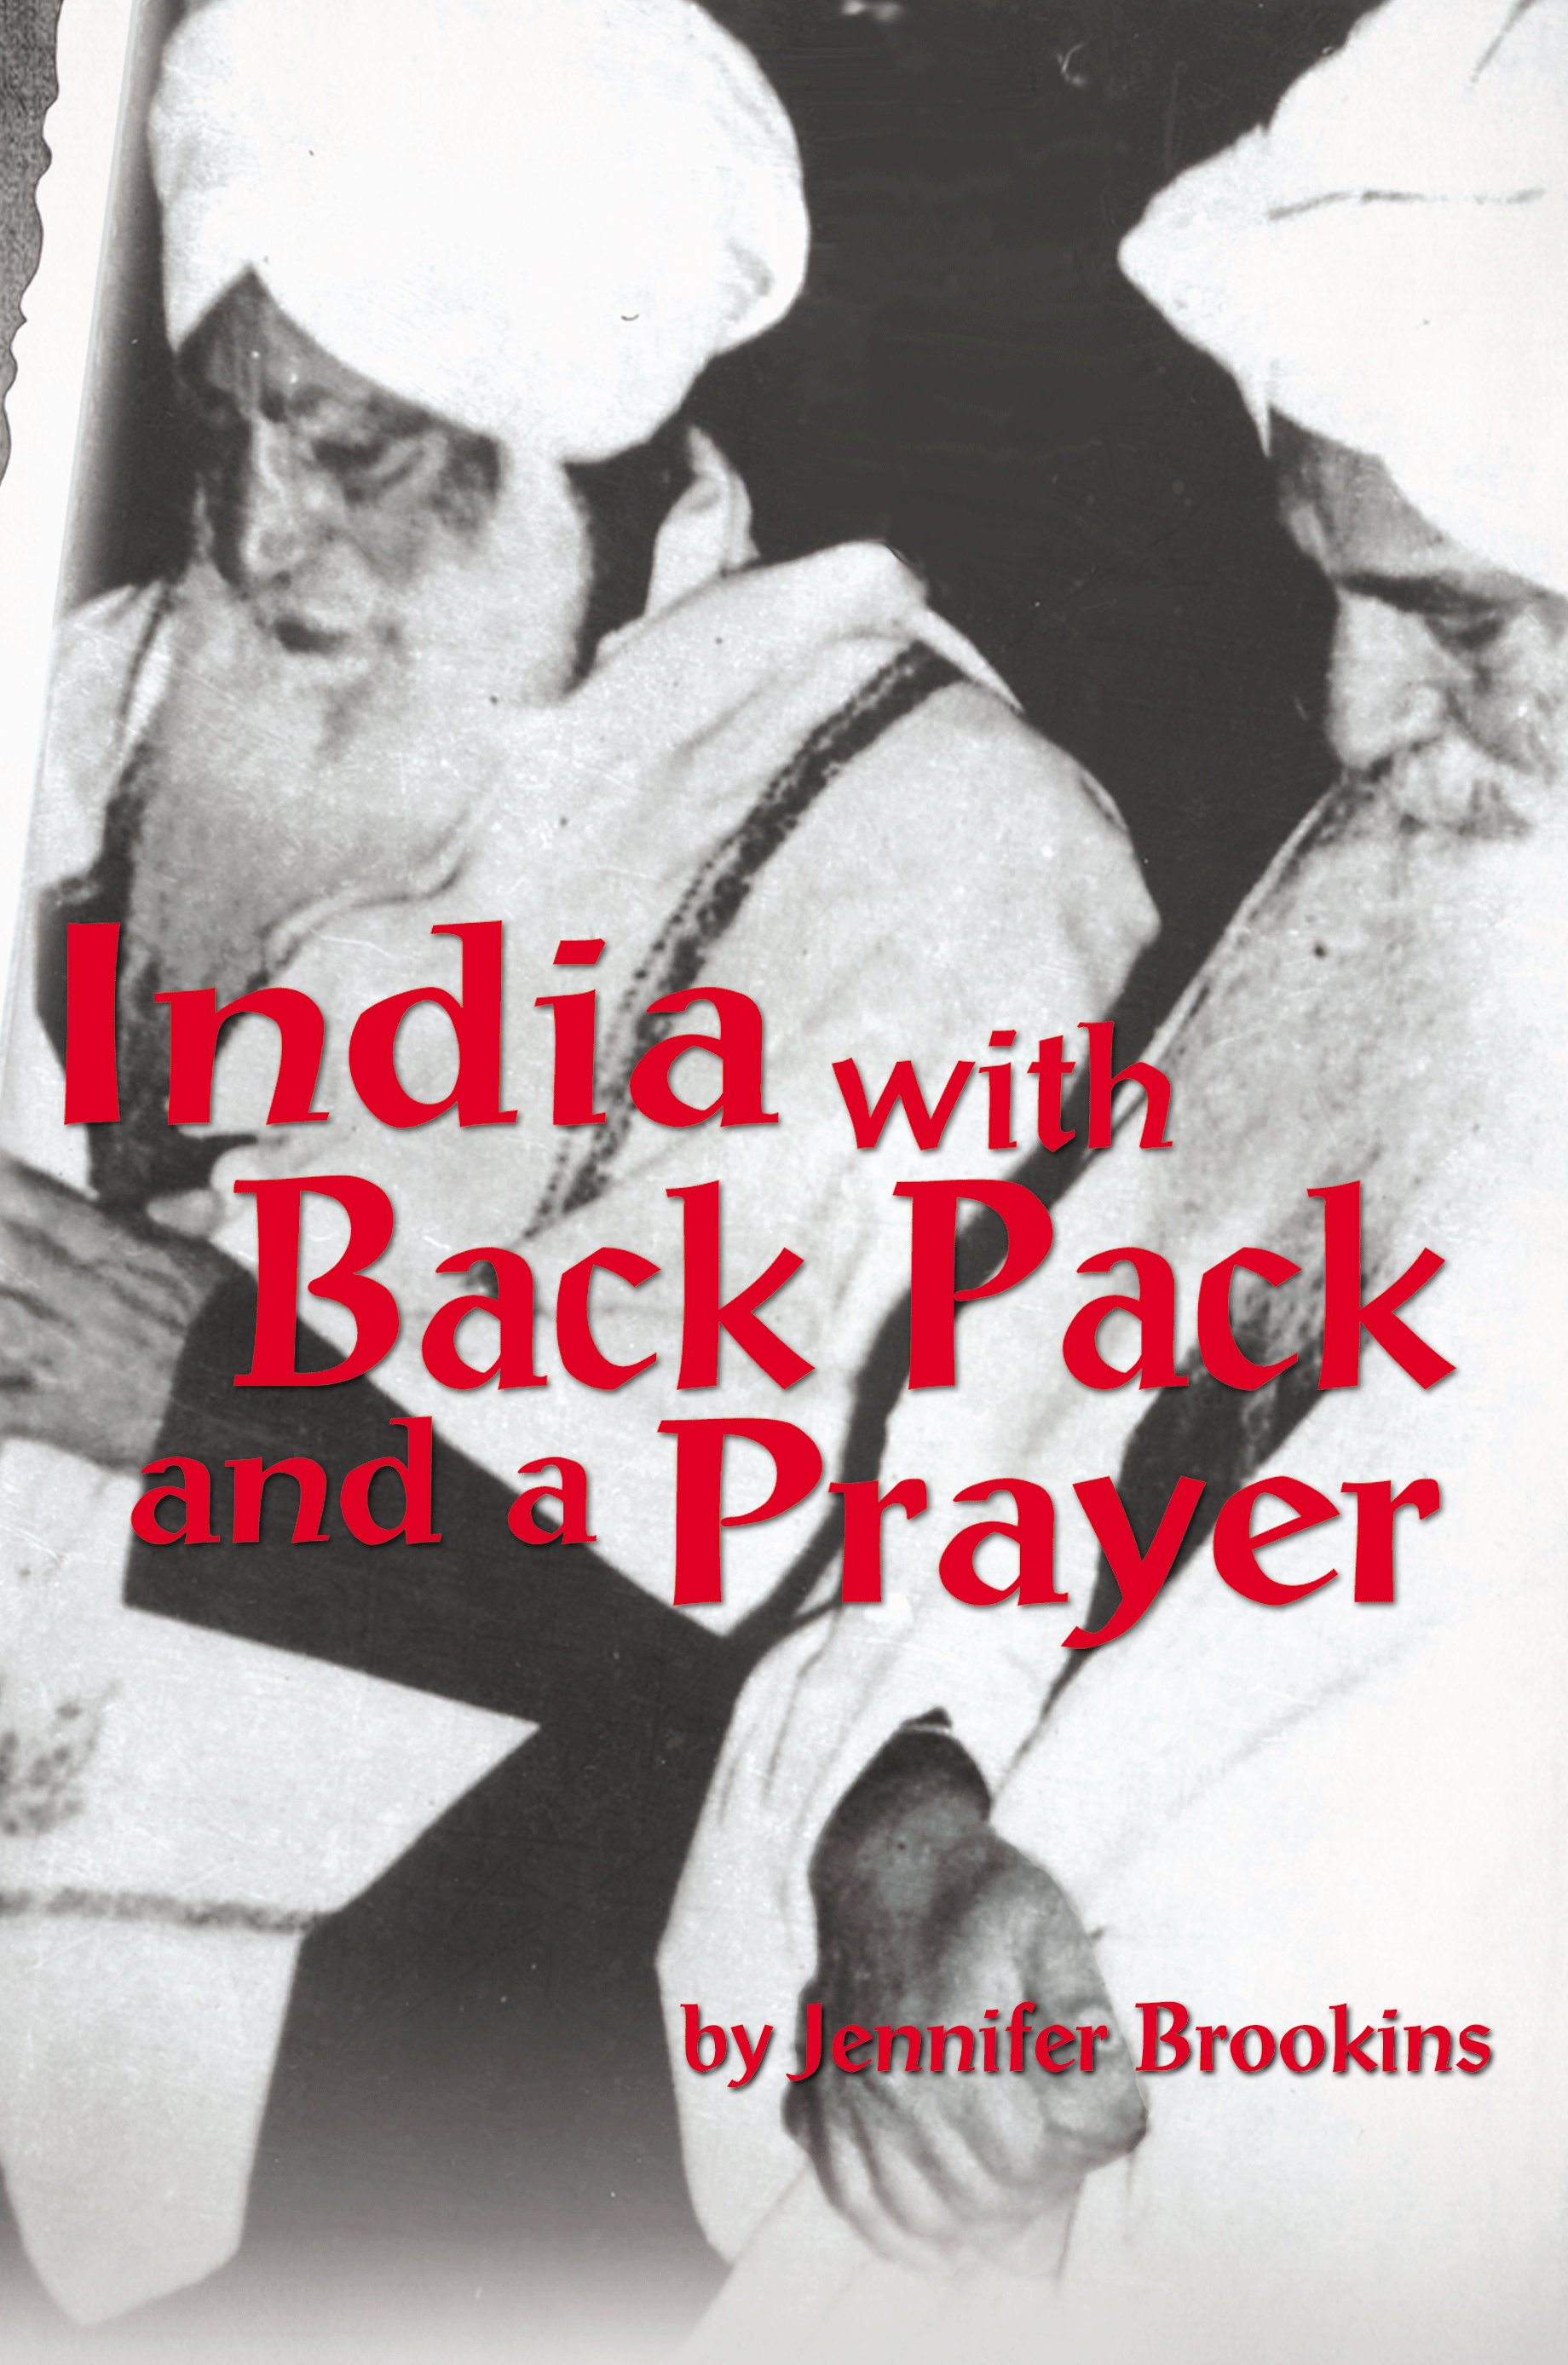 India with Backpack and a Prayer